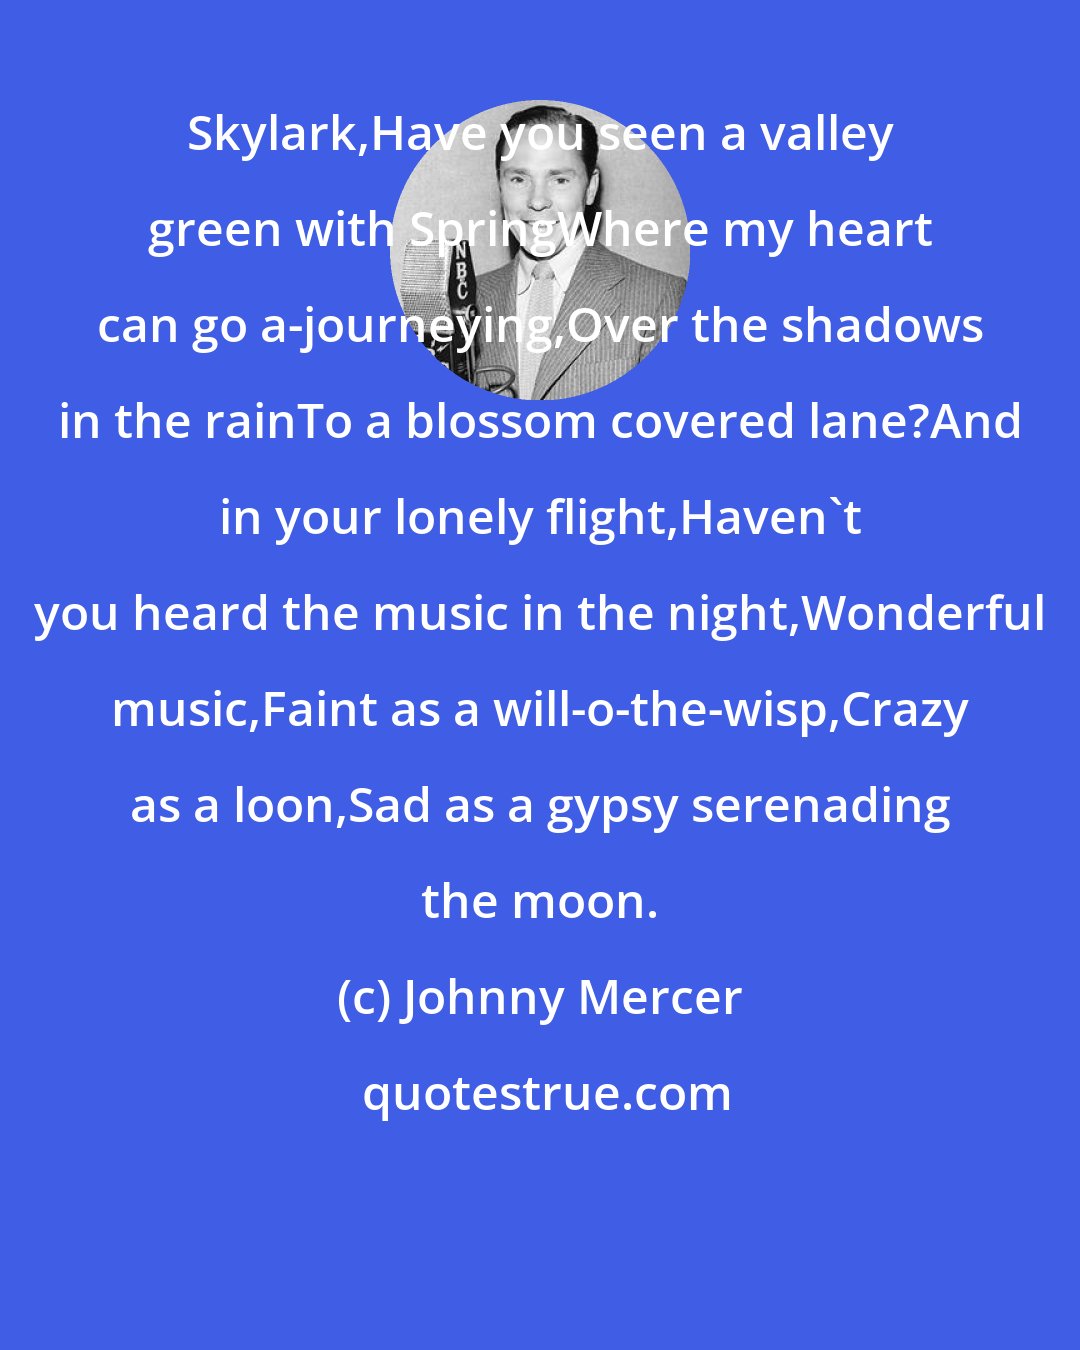 Johnny Mercer: Skylark,Have you seen a valley green with SpringWhere my heart can go a-journeying,Over the shadows in the rainTo a blossom covered lane?And in your lonely flight,Haven't you heard the music in the night,Wonderful music,Faint as a will-o-the-wisp,Crazy as a loon,Sad as a gypsy serenading the moon.